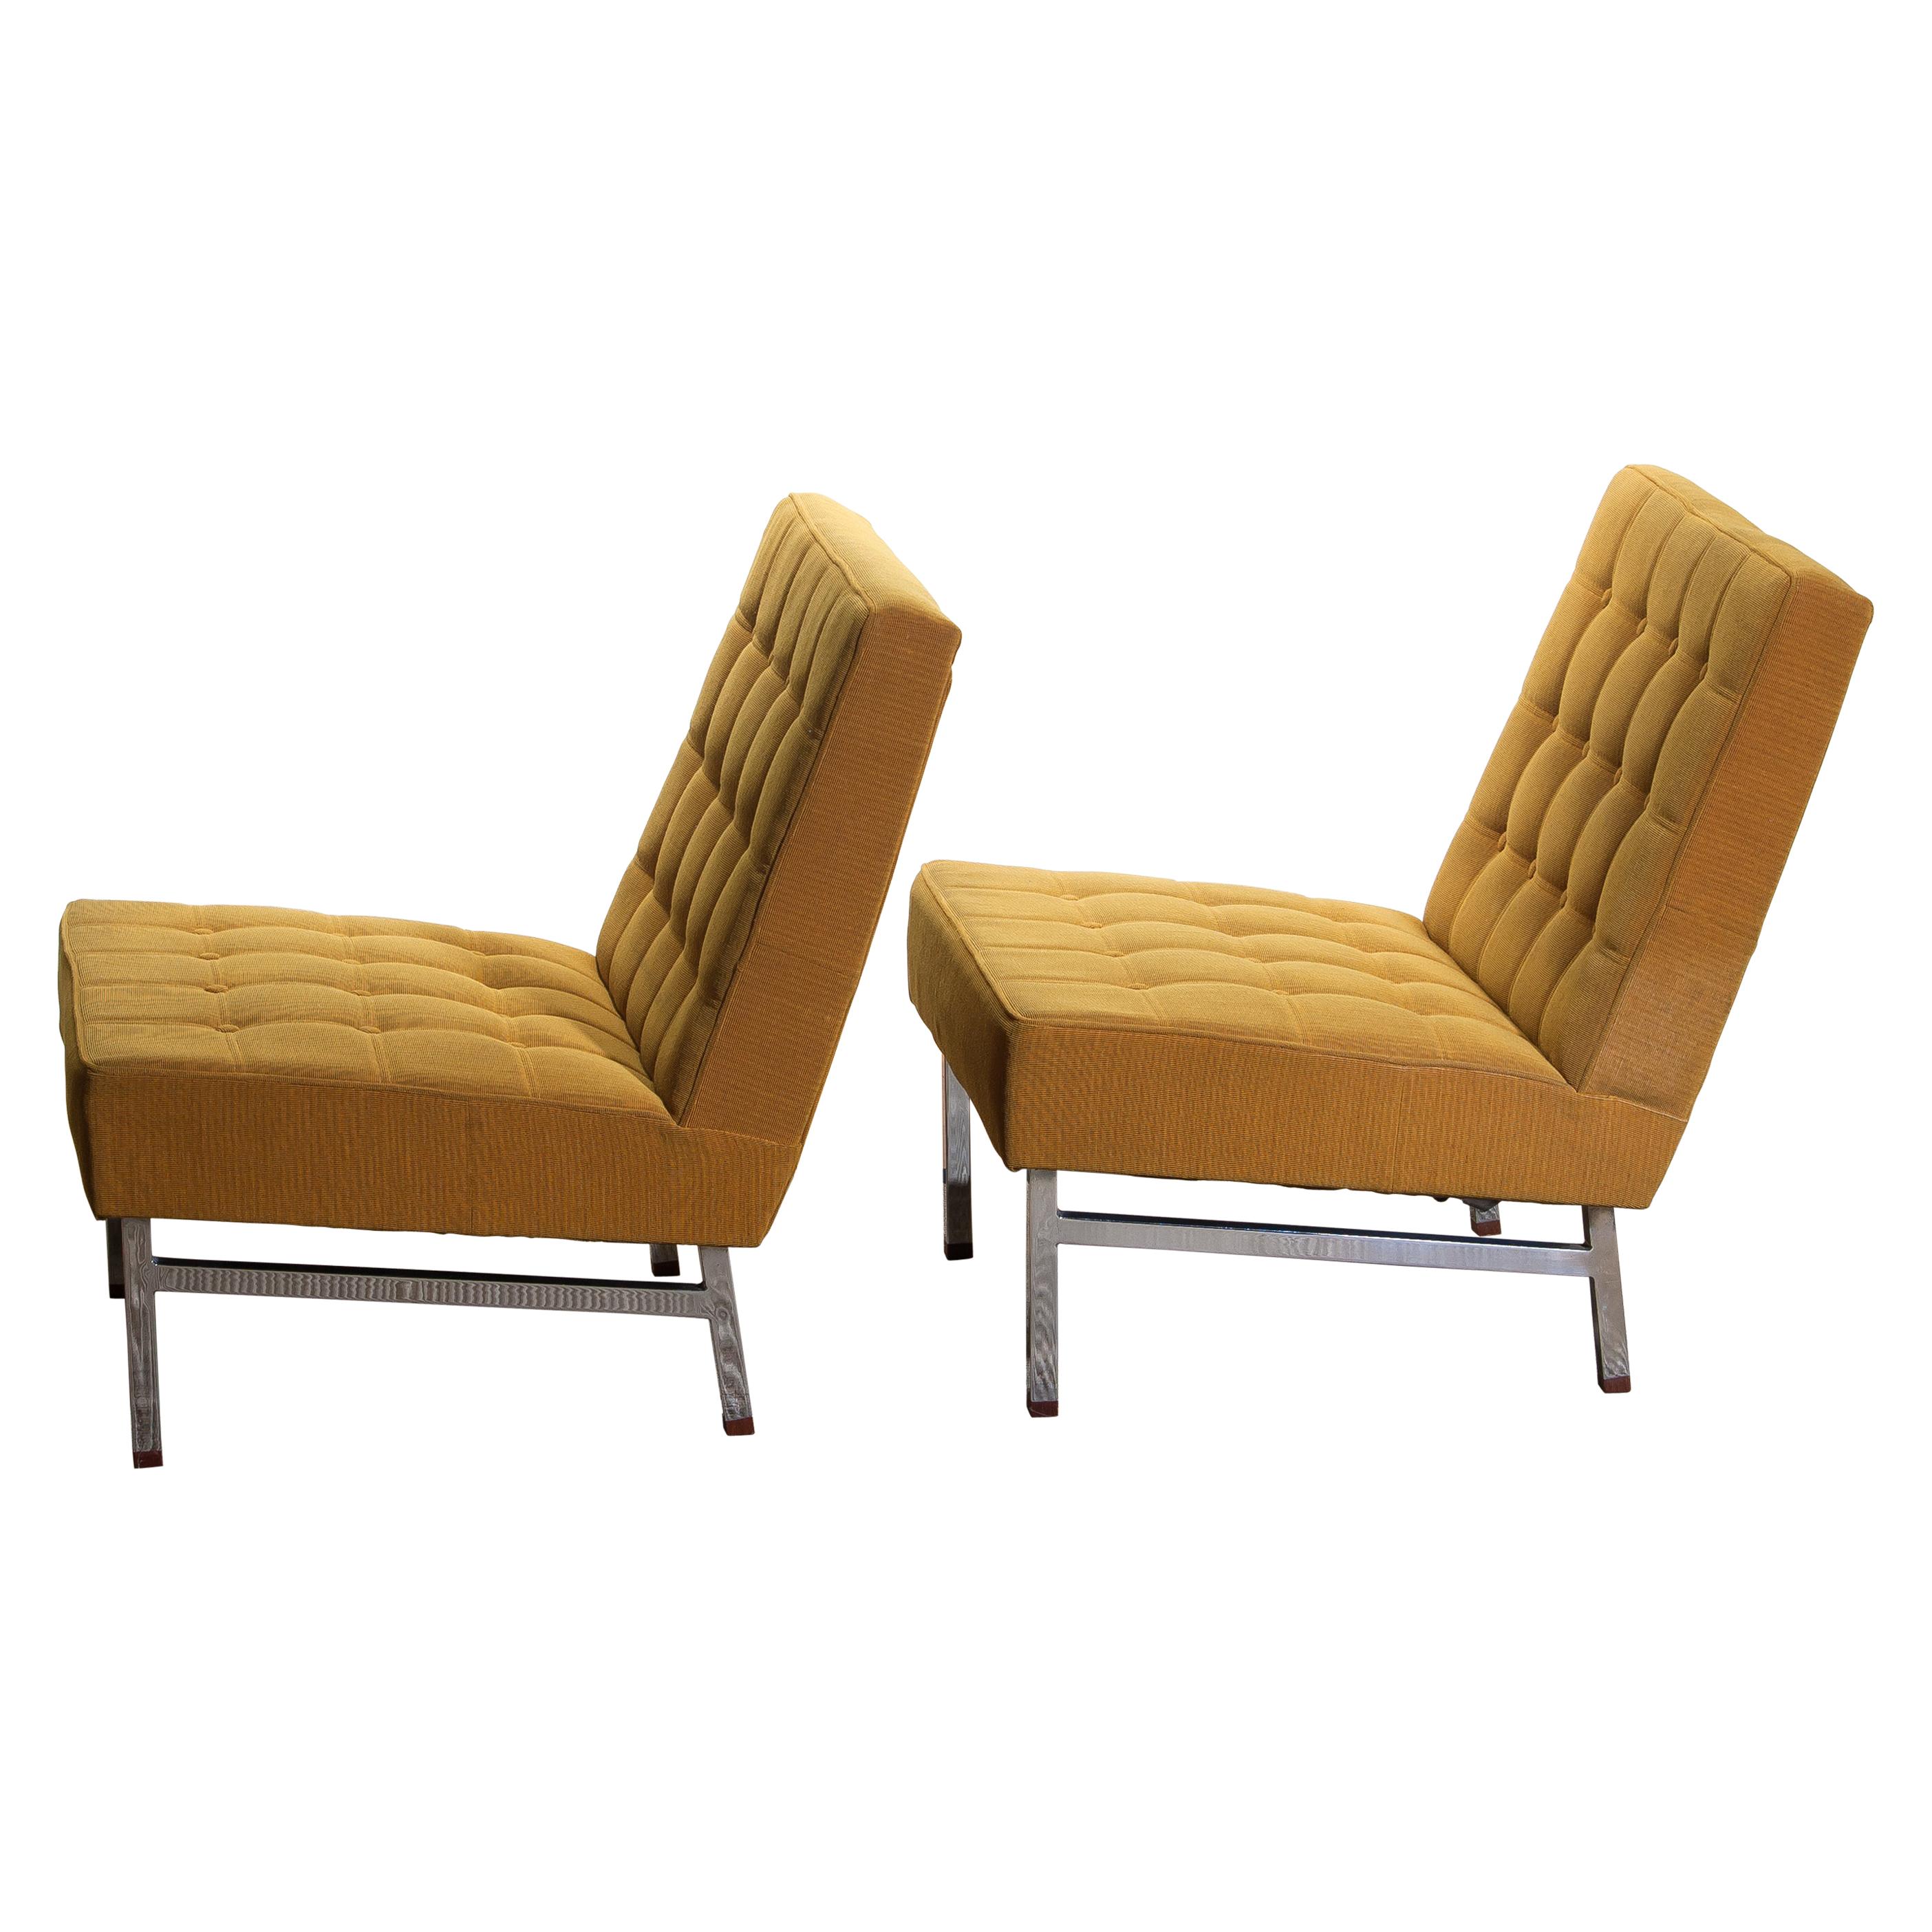 1960, set of two comfortable and extremely rare lounge chairs designed by Karl Erik Ekselius for JOC Möbler Vetlanda, Sweden.
Both chairs are original and in good condition. Somewhat dry filling.
Stands are made of chromed metal with teak ends.
  